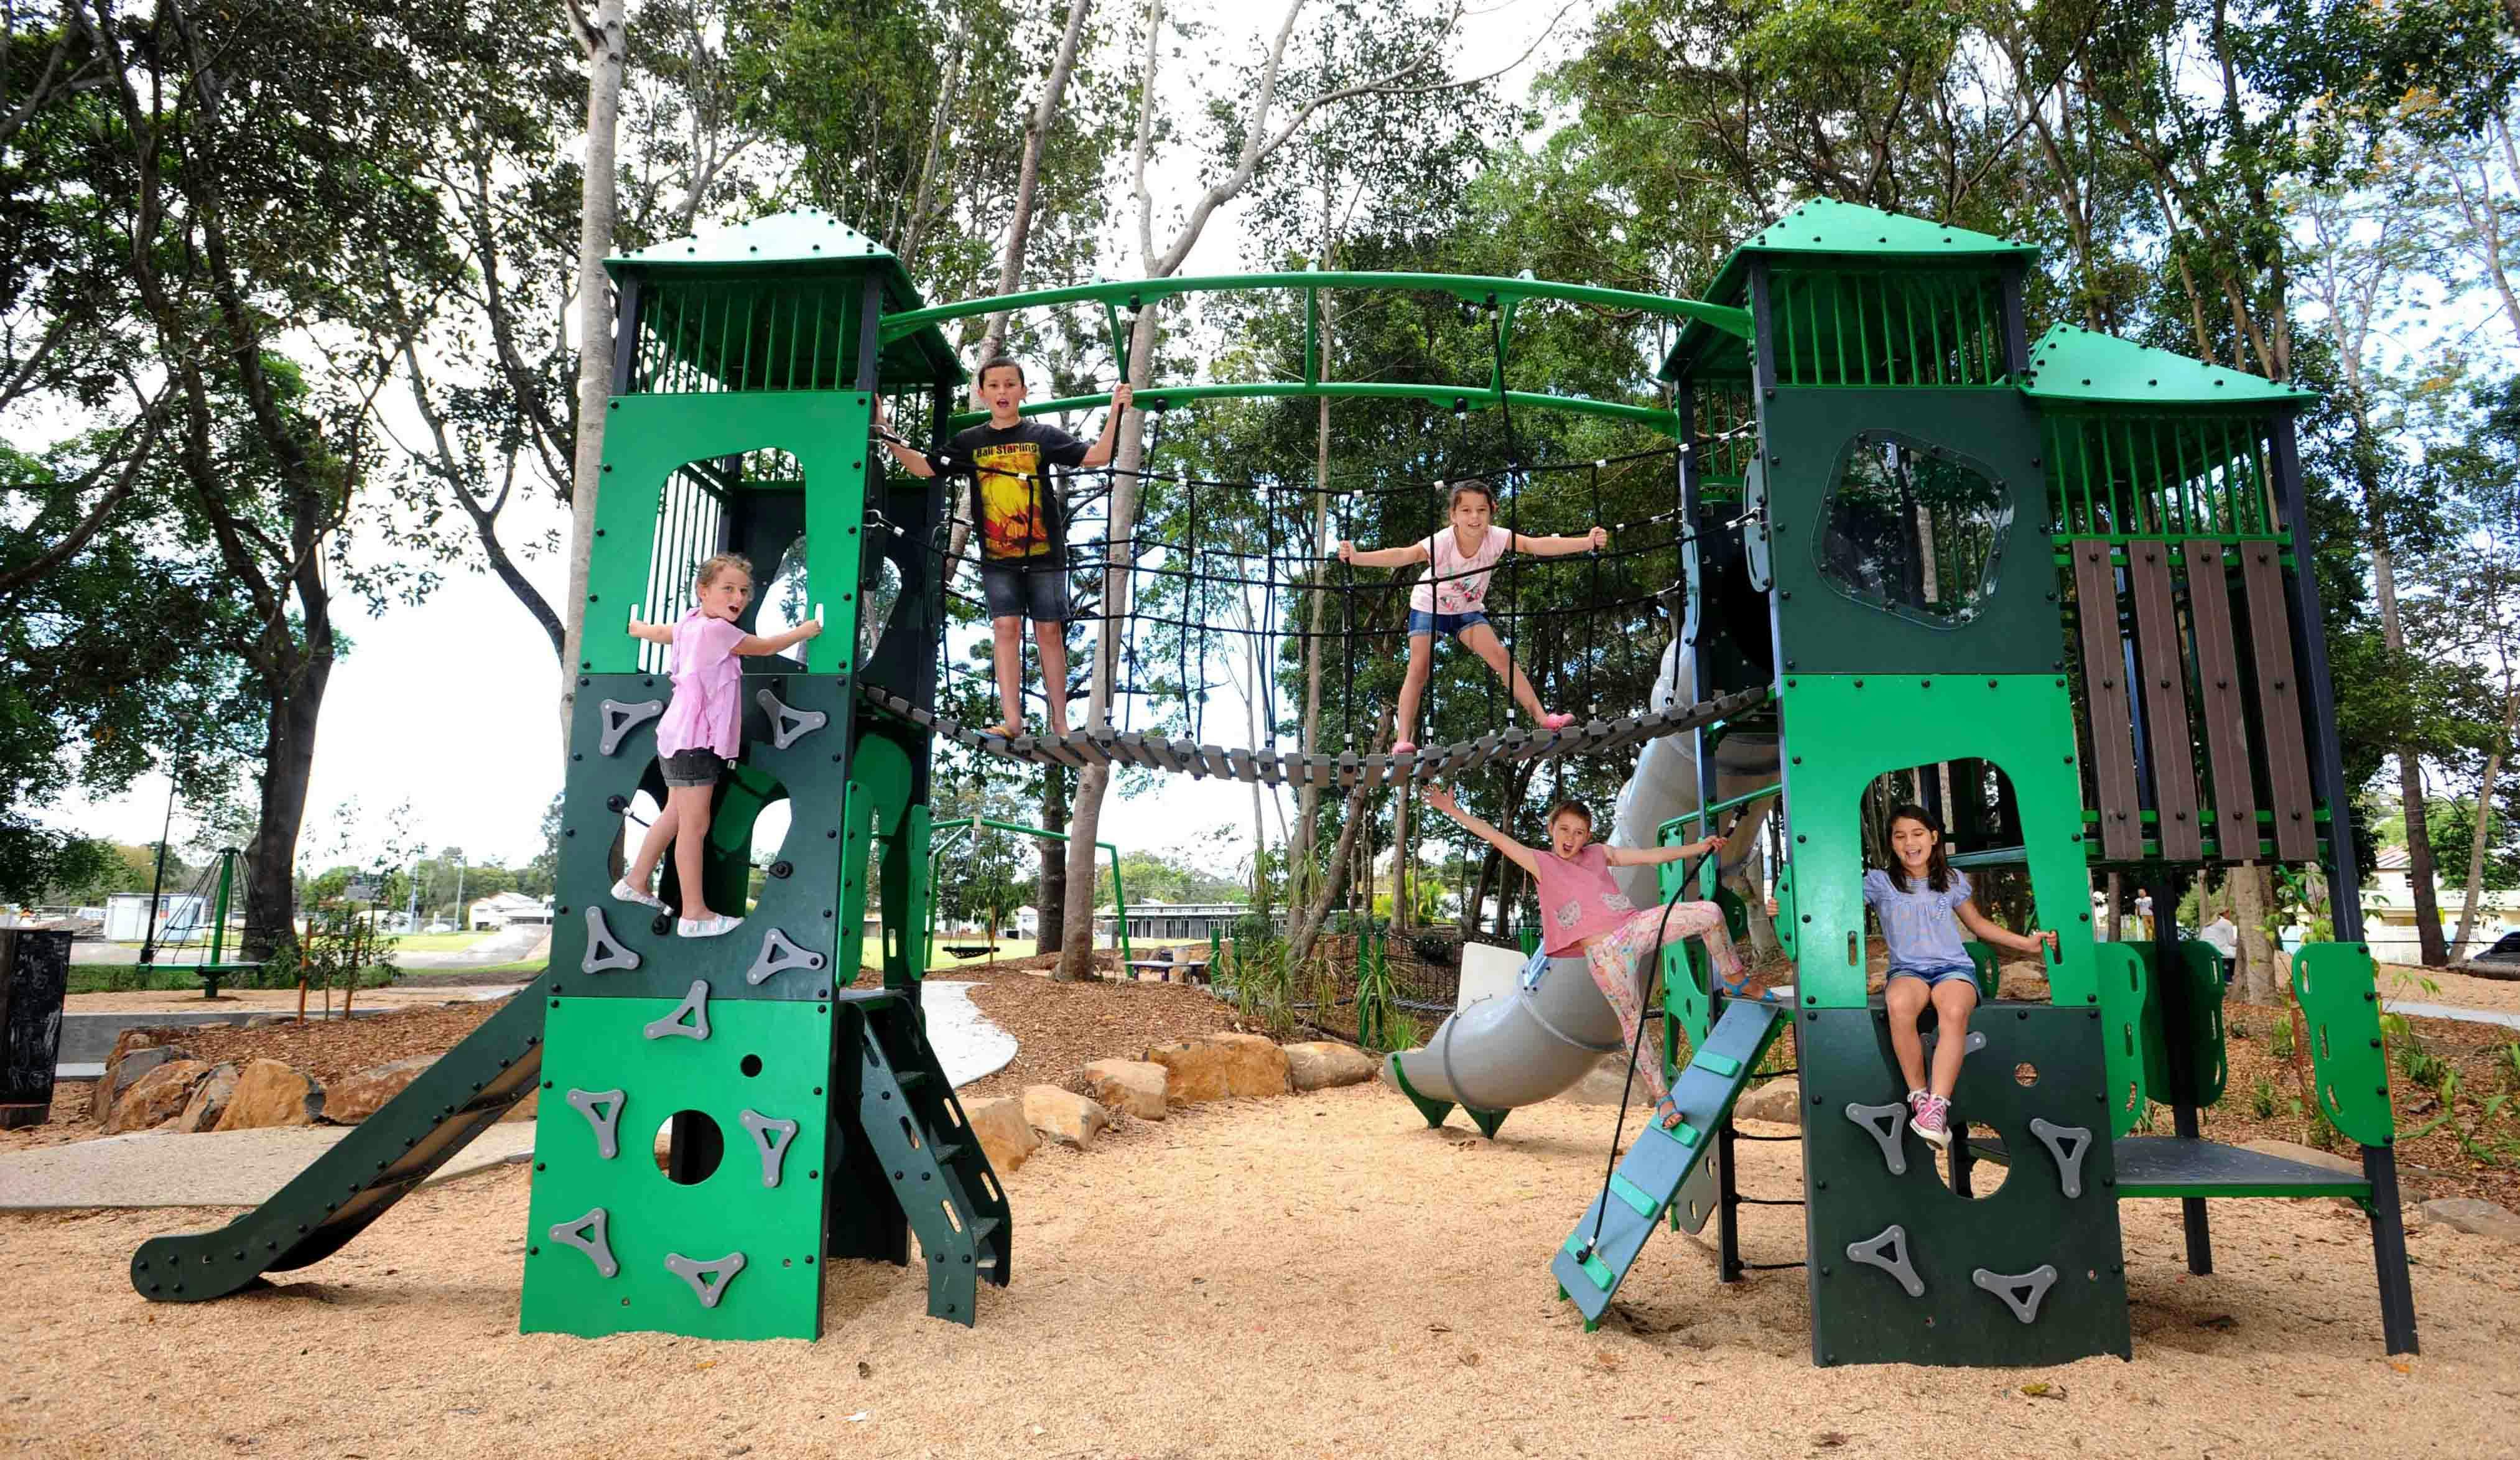 Playground provide a fun setting for culture among young people and can host special activities.